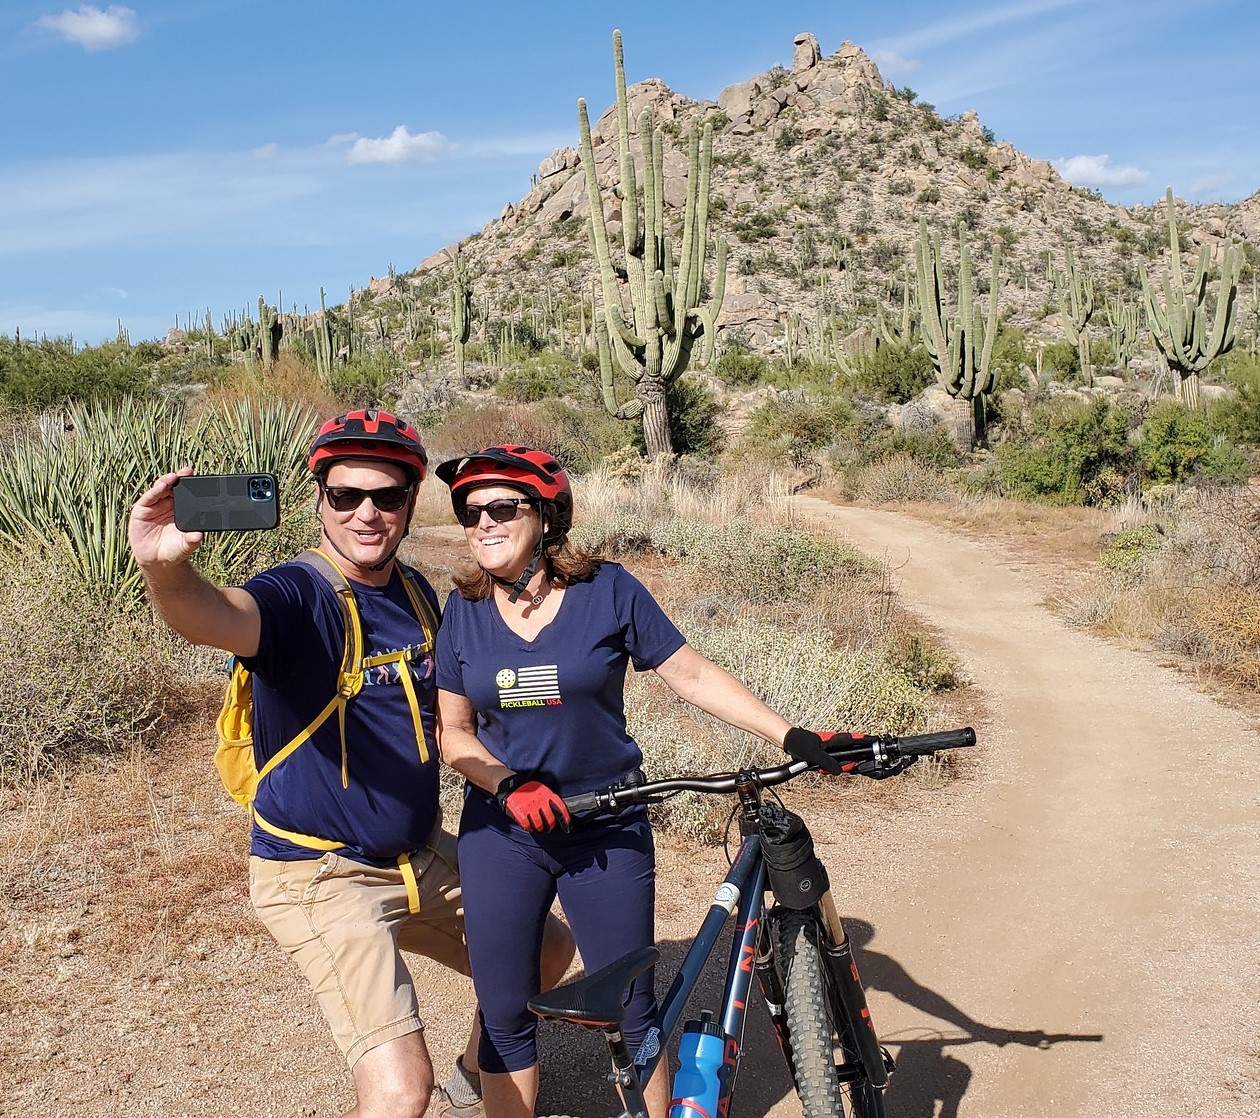 A married couple enjoying a Scottsdale mountain bike tour with the Wild Bunch Desert Guides pauses for a selfie together along the trail with a picturesque background behind them.